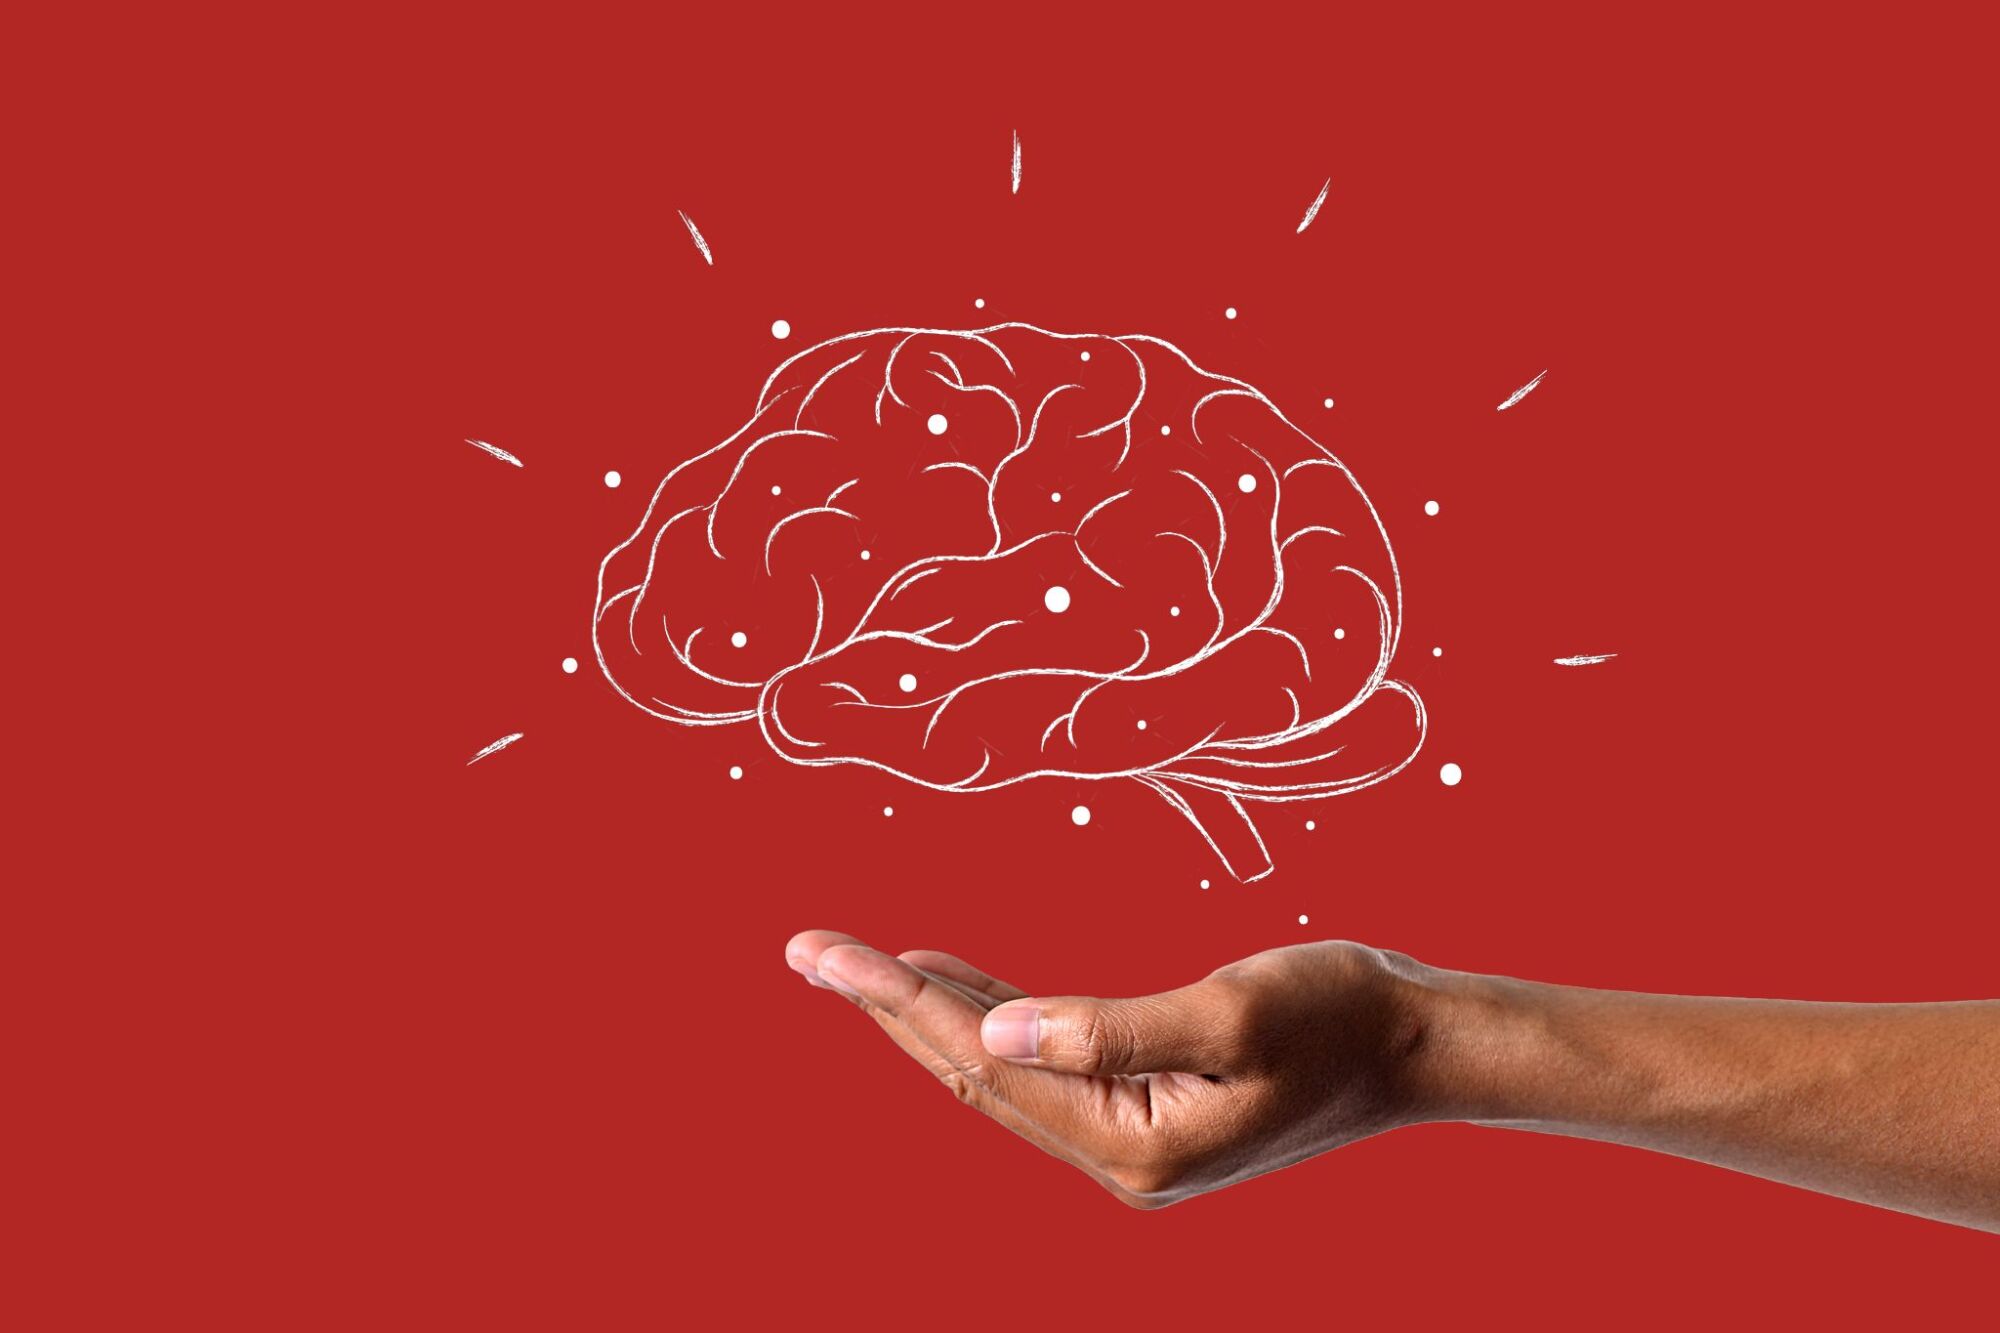 Red background with female hand holding a white sketch of a brain